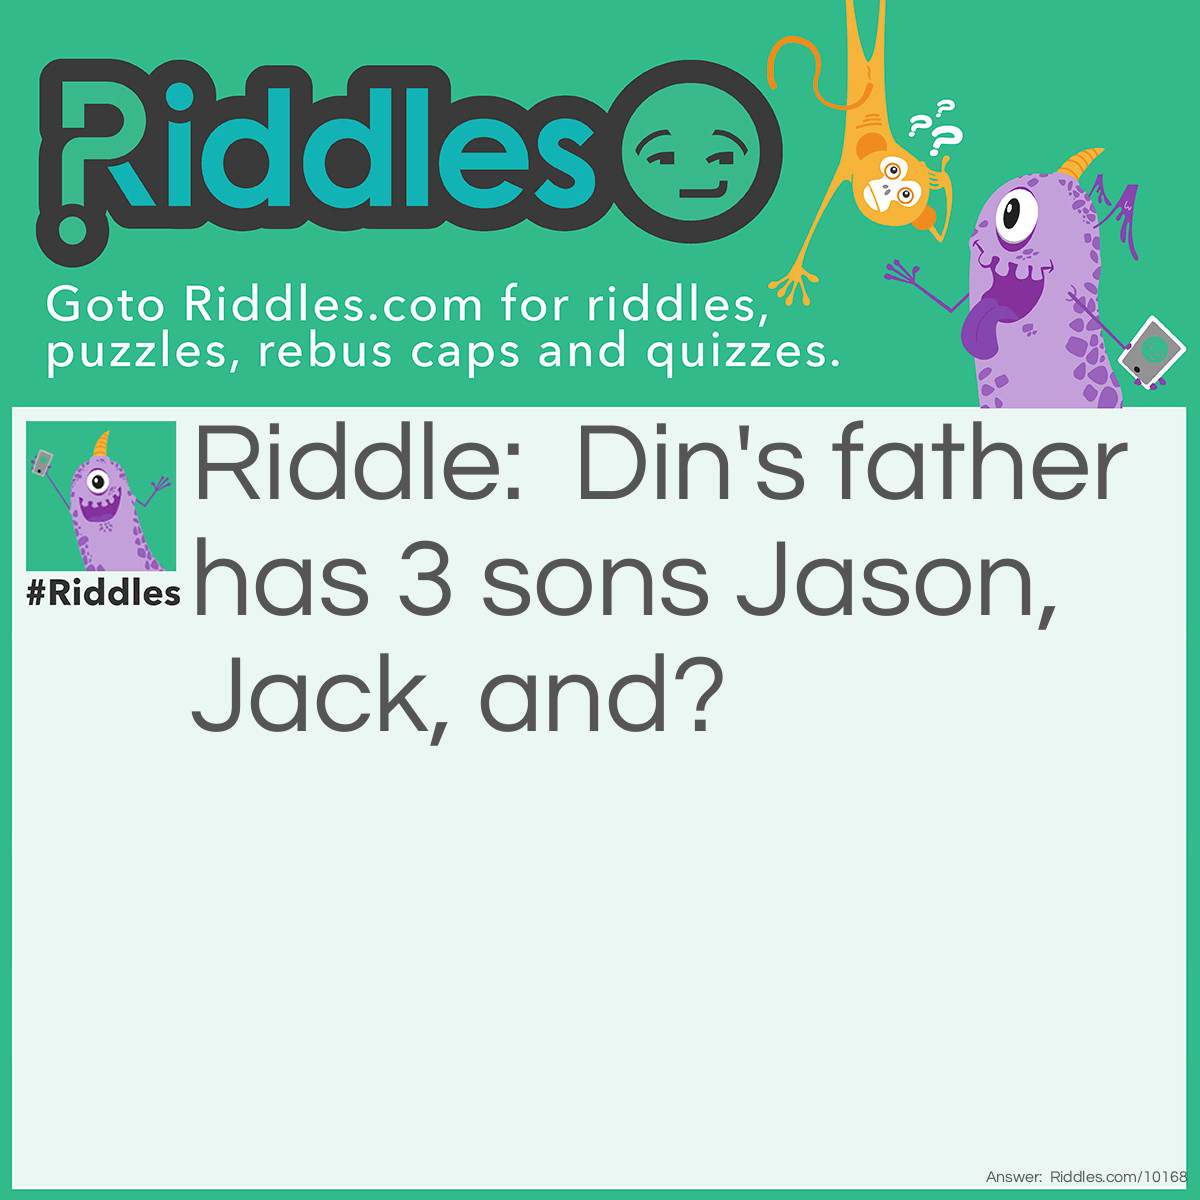 Riddle: Din's father has 3 sons Jason, Jack, and? Answer: Din.